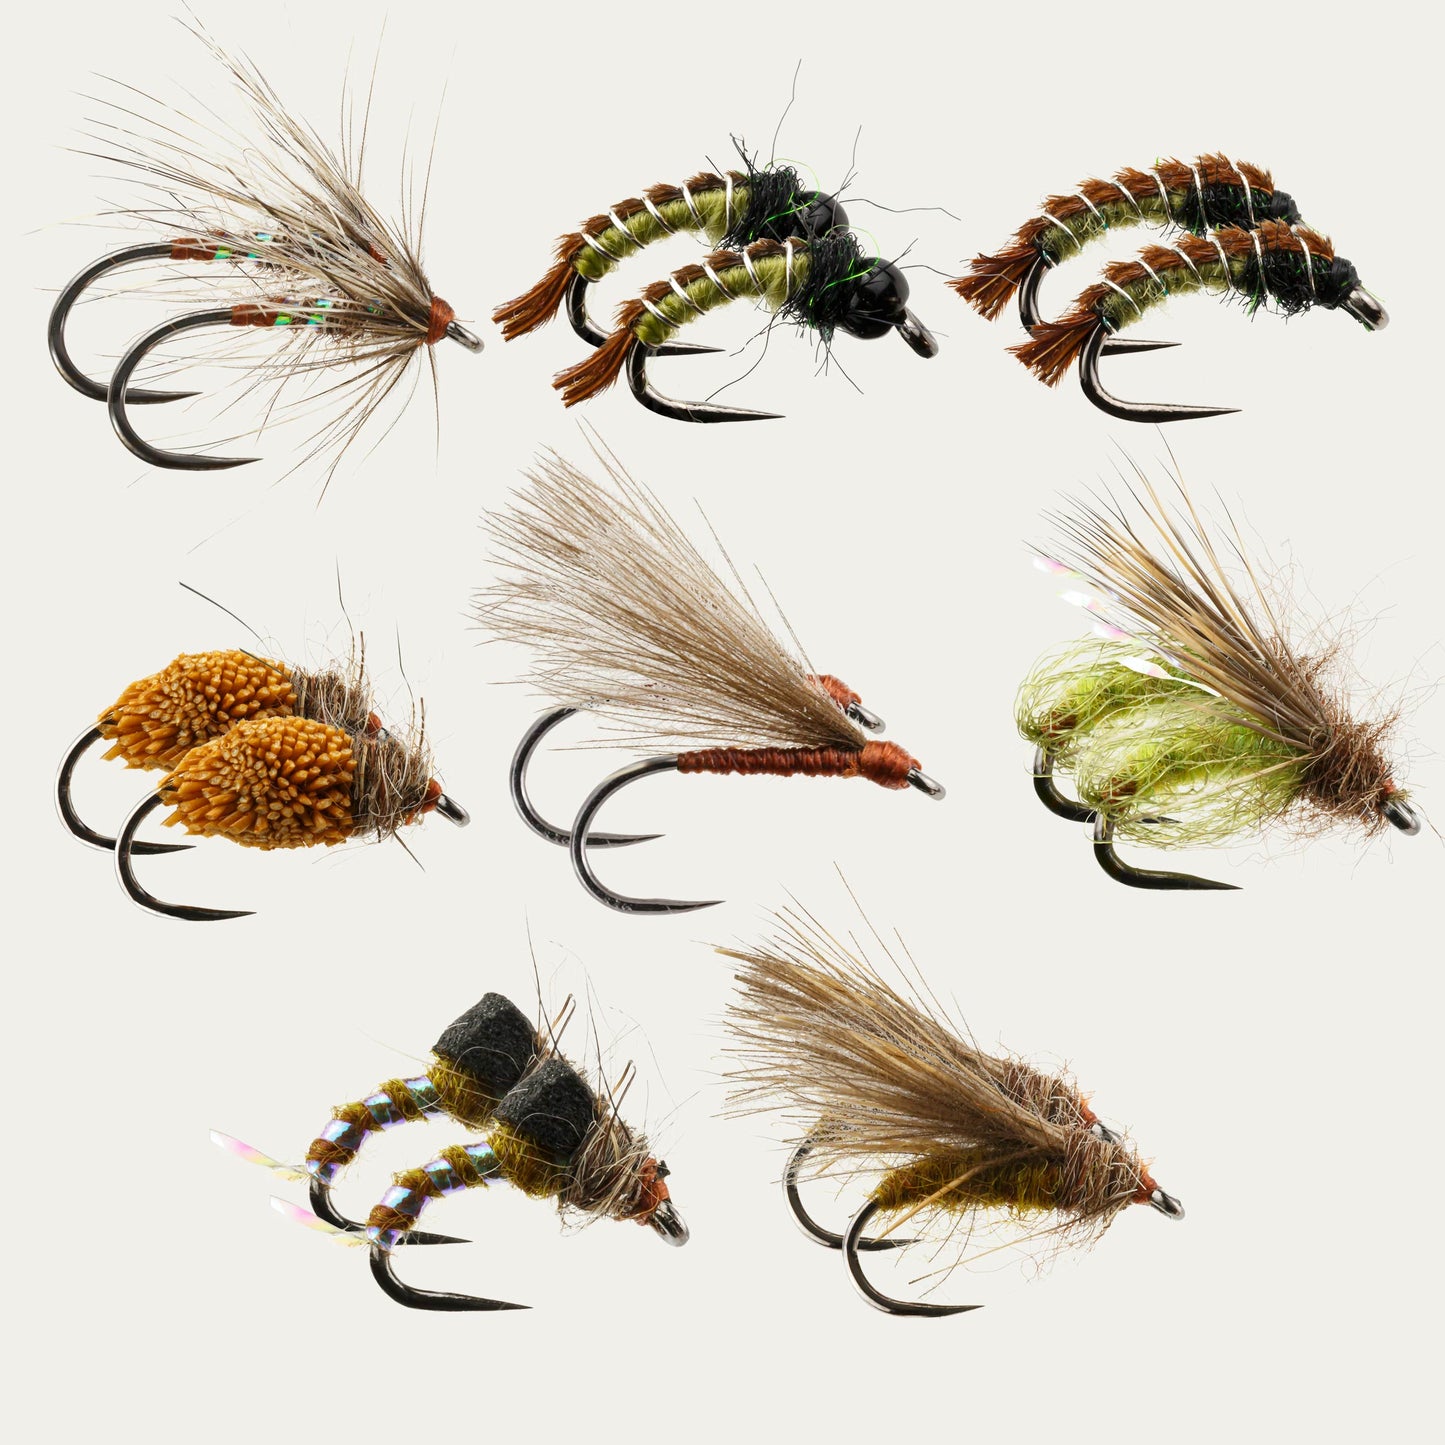 Early Spring Caddis BugCycle Fly Assortment - 16pk, Barbless, Ahrex